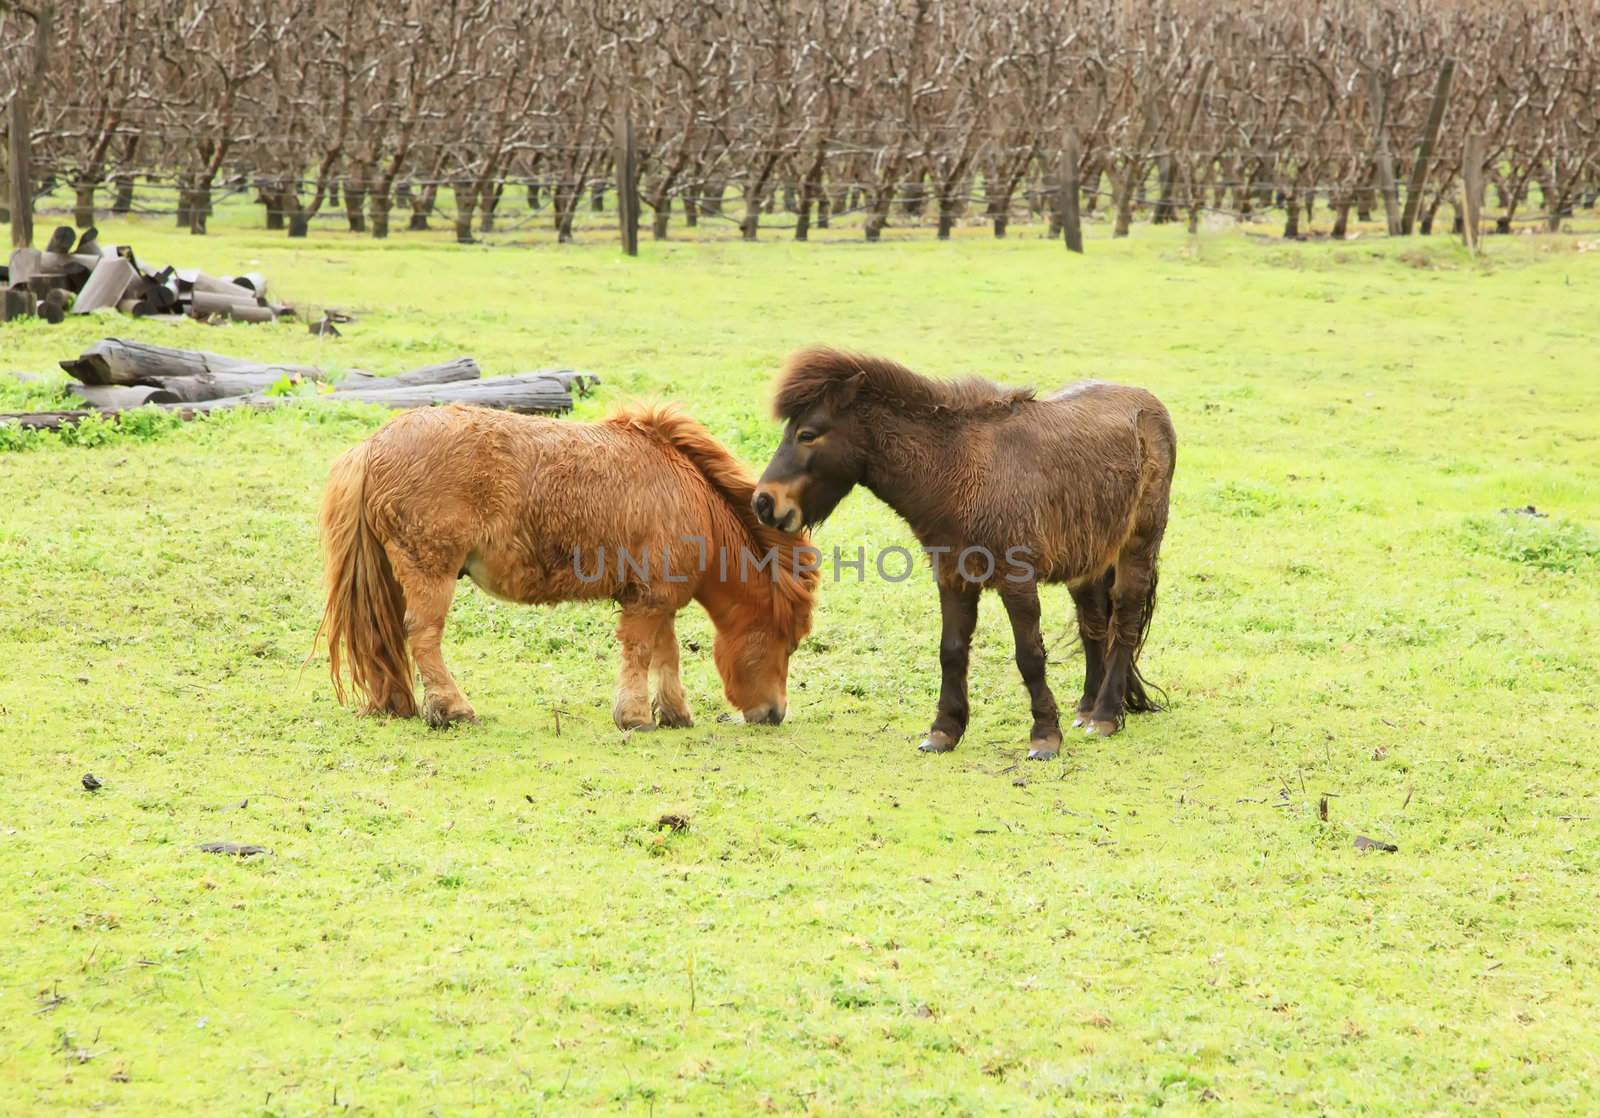 Ponies in the Rural Countryside Area Outdoors